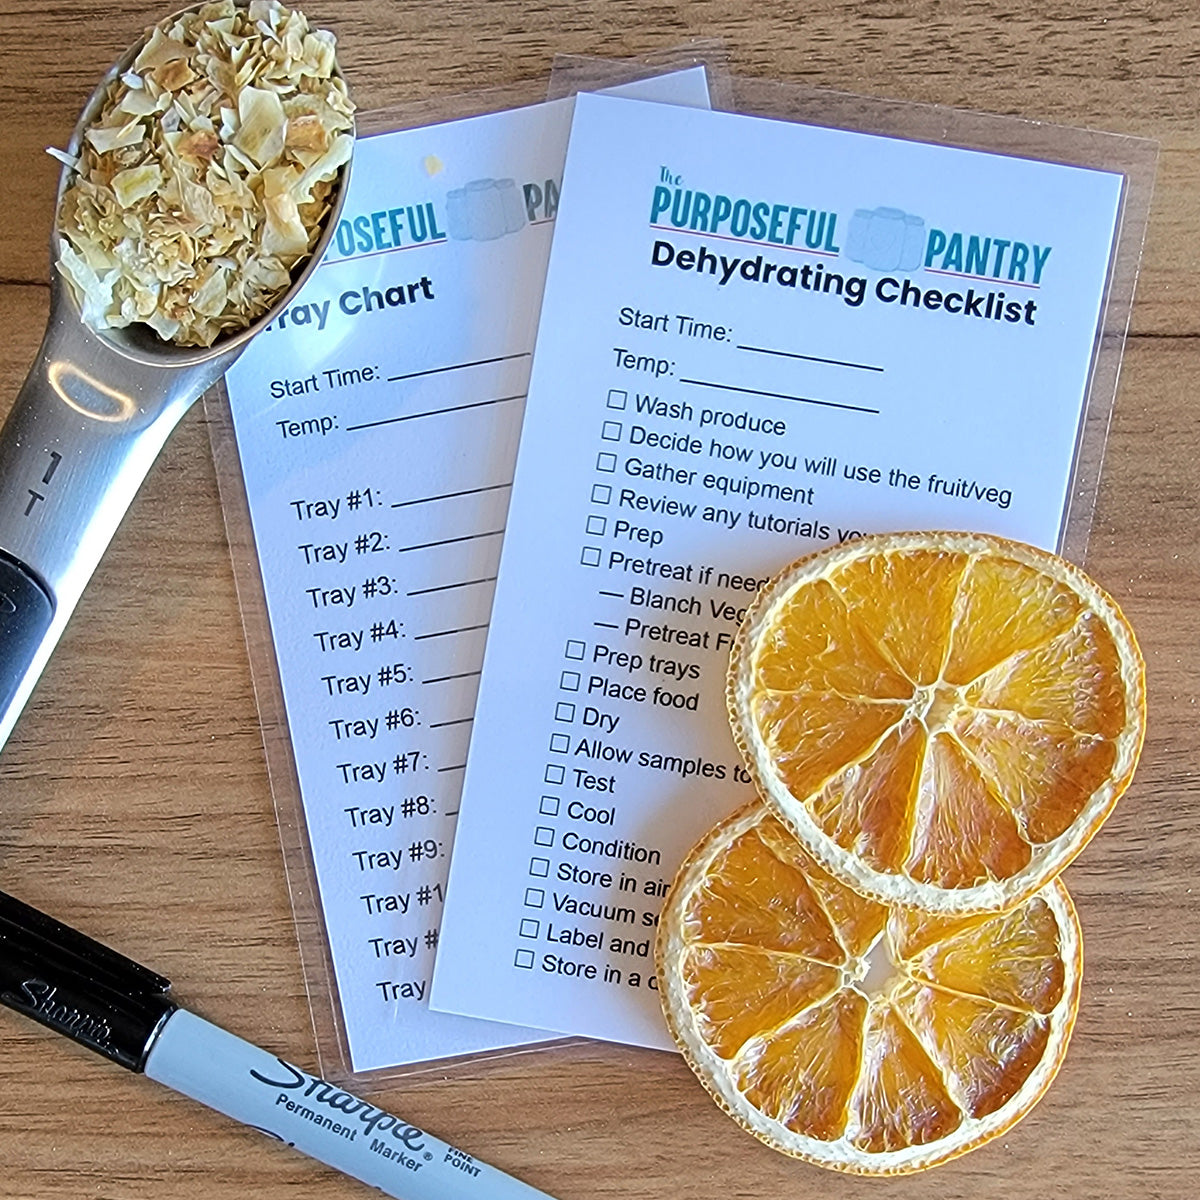 Dehydrating Questions & Answers - The Purposeful Pantry